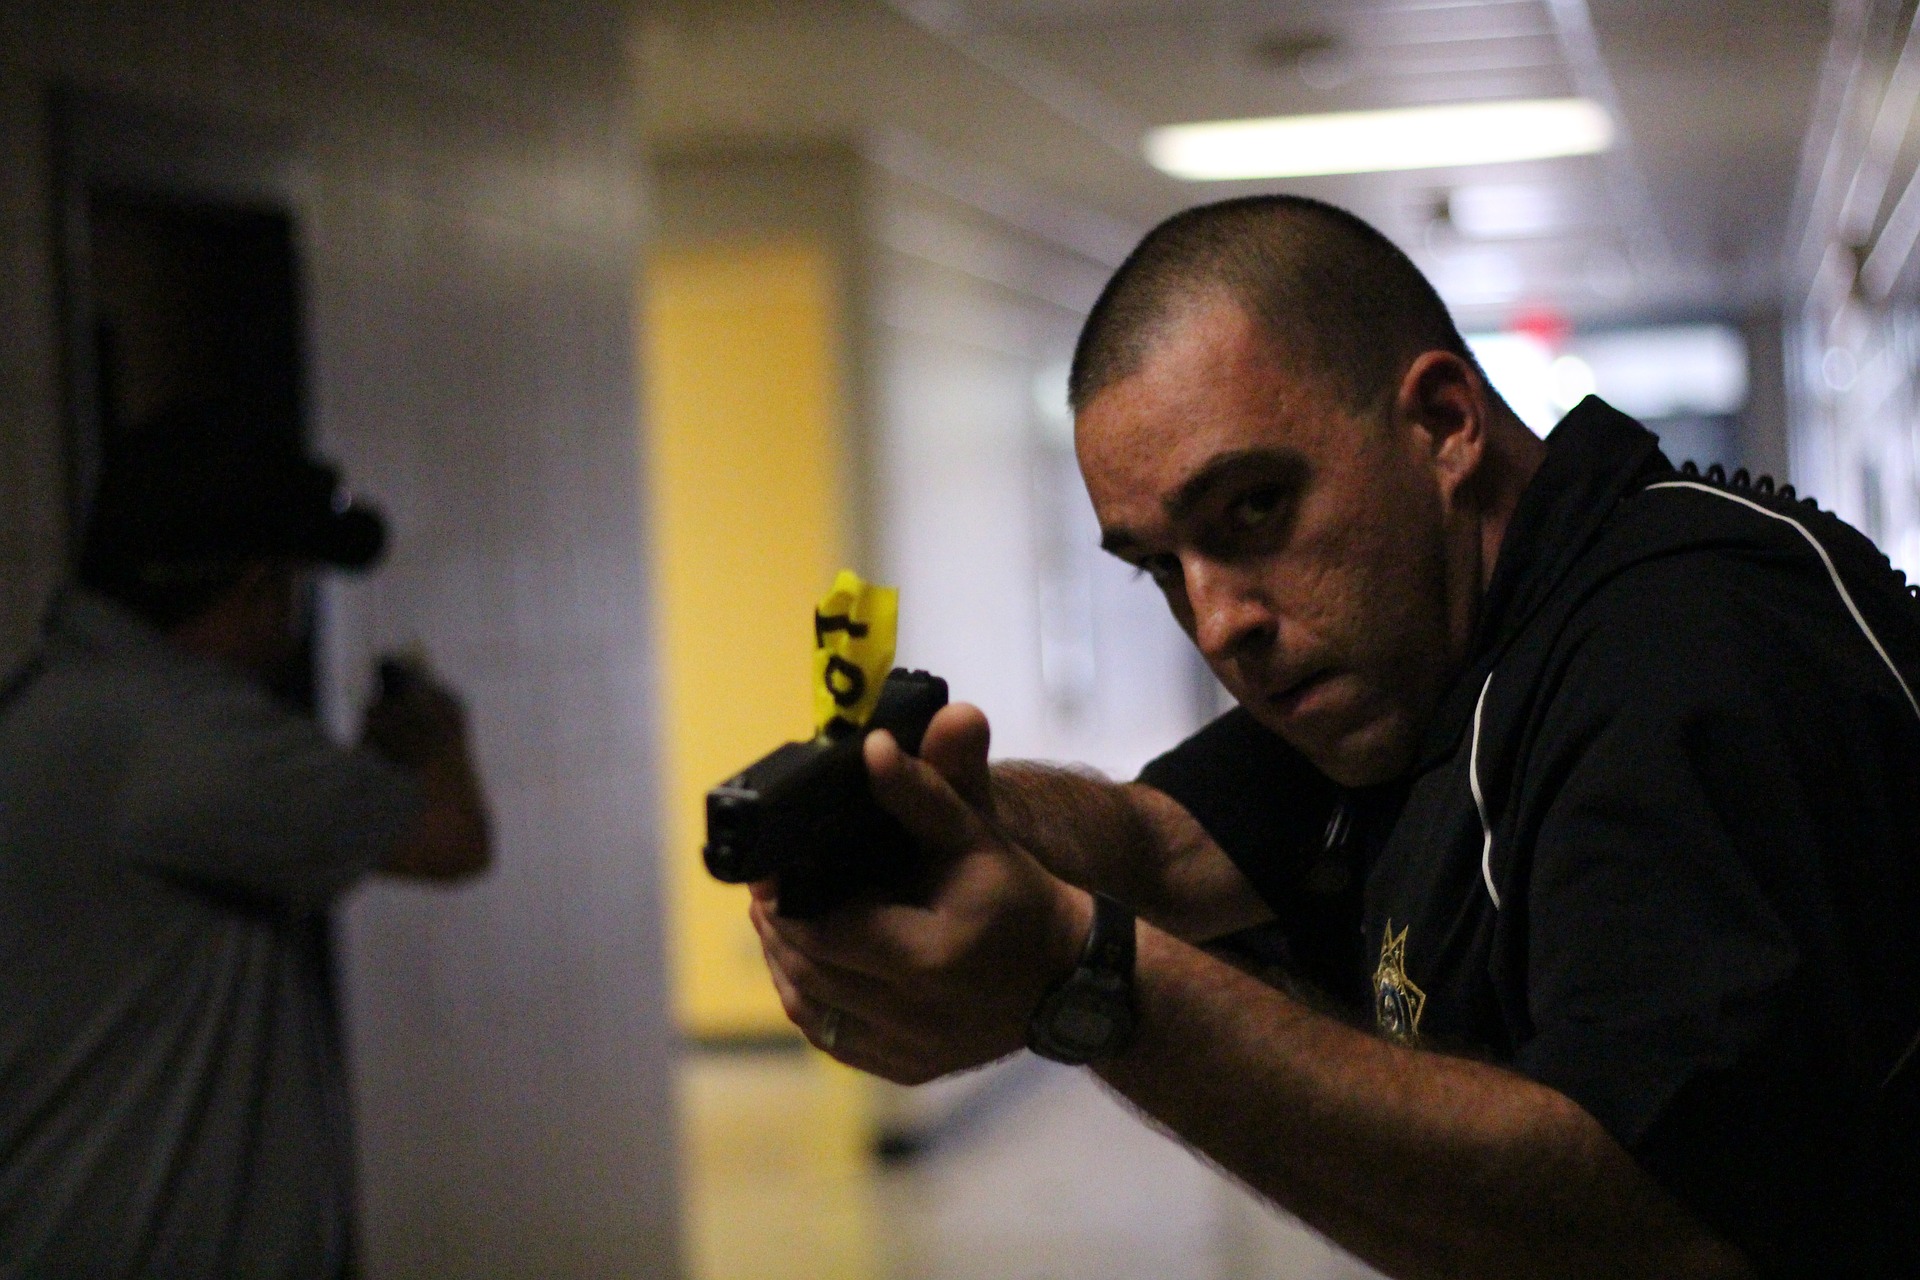 active-shooter-rapid-response-training-video-rothstein-publishing